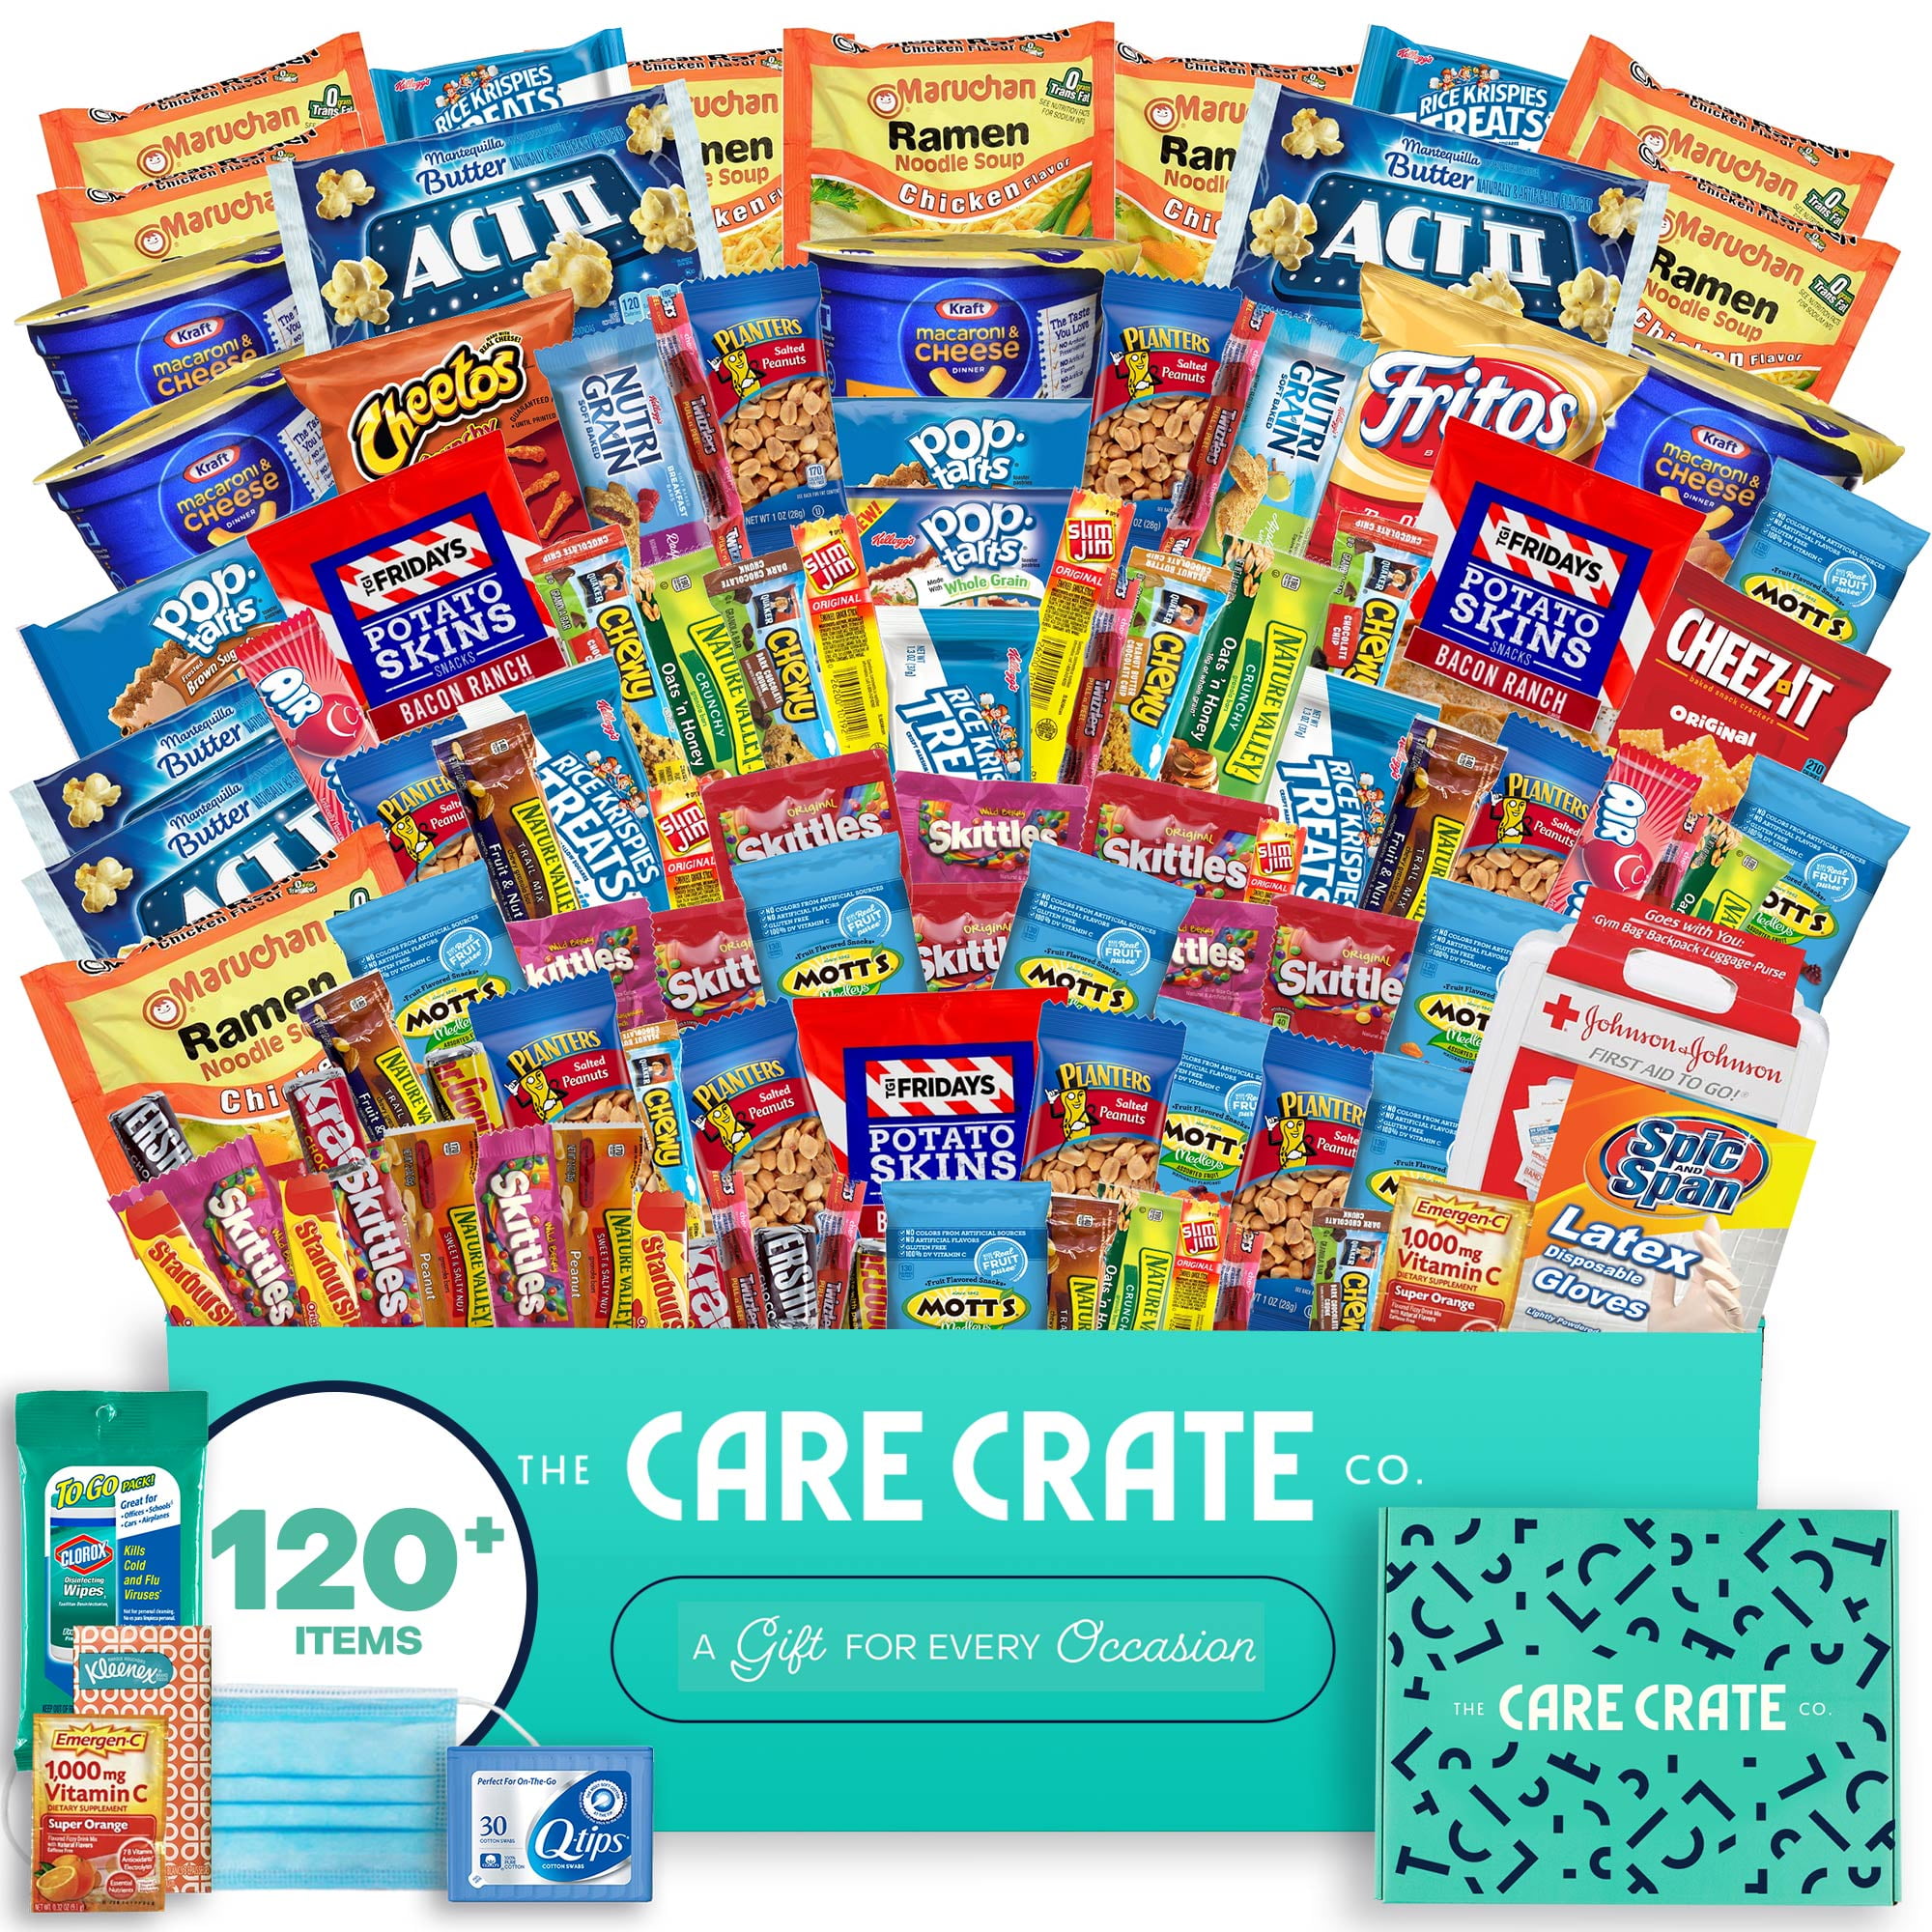 Extra Large Snack & Personal Care Box - 120+ items including Personal Care Products, Microwaveables, Candy, Snacks, Chocolates & More